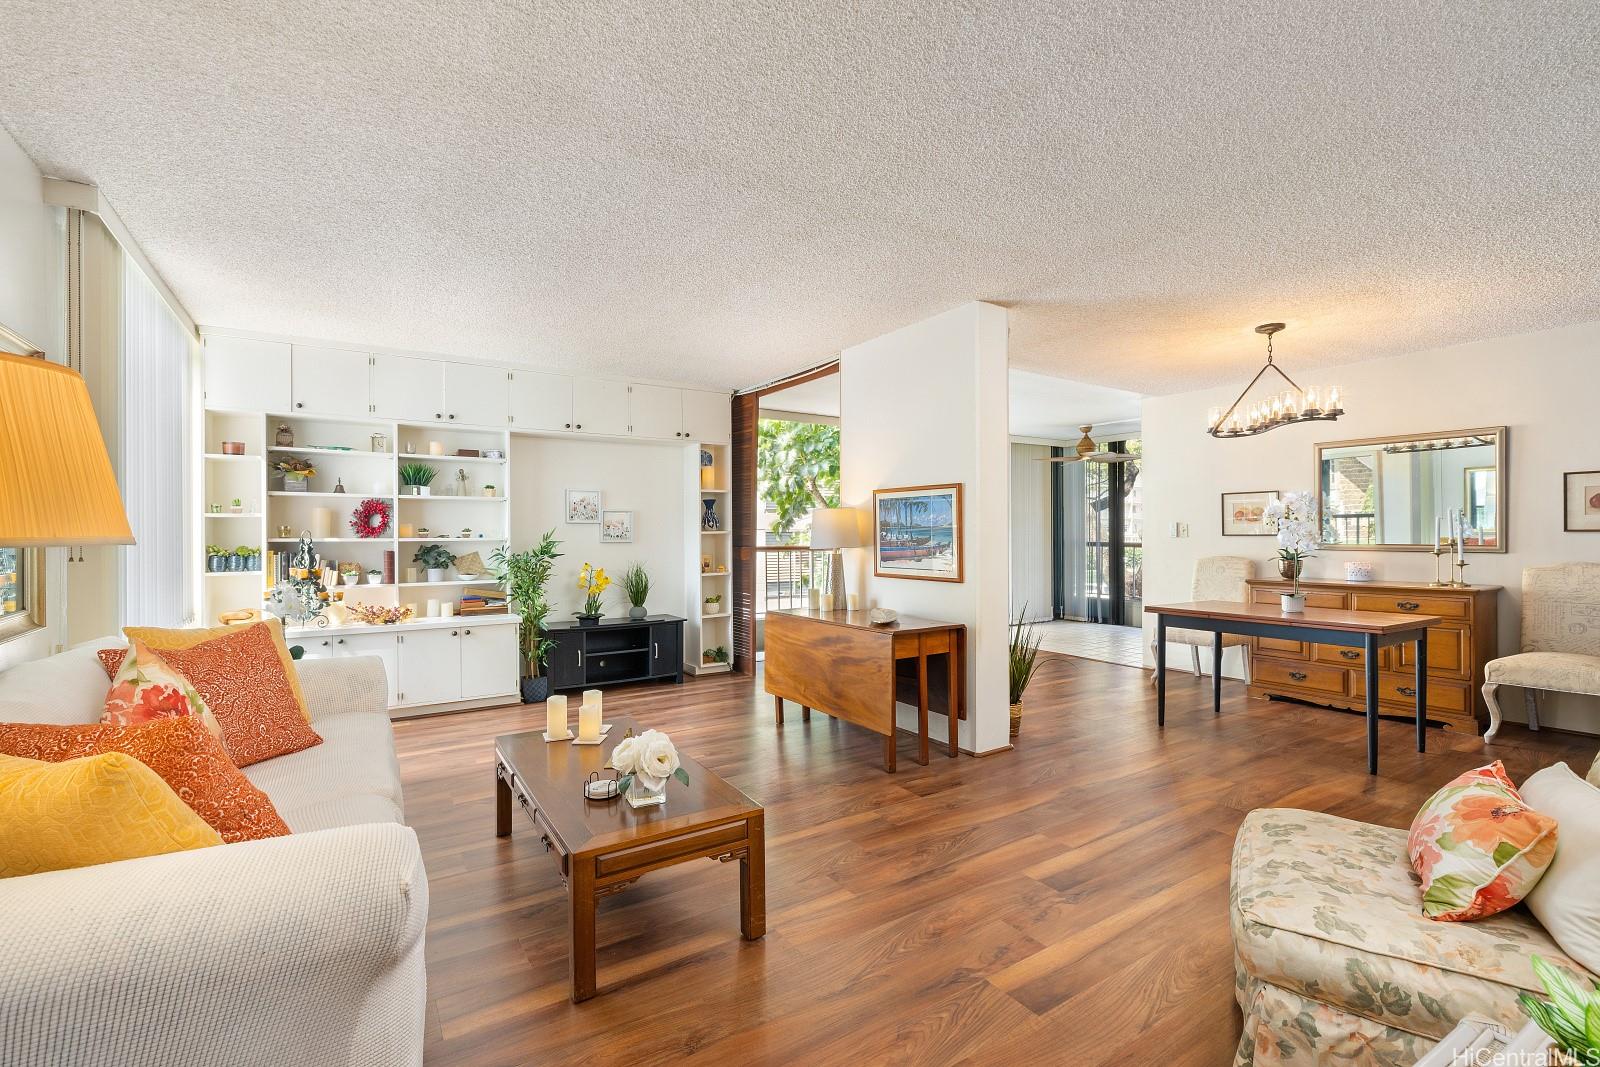 This bright, expansive, open concept living room shows beautifully.